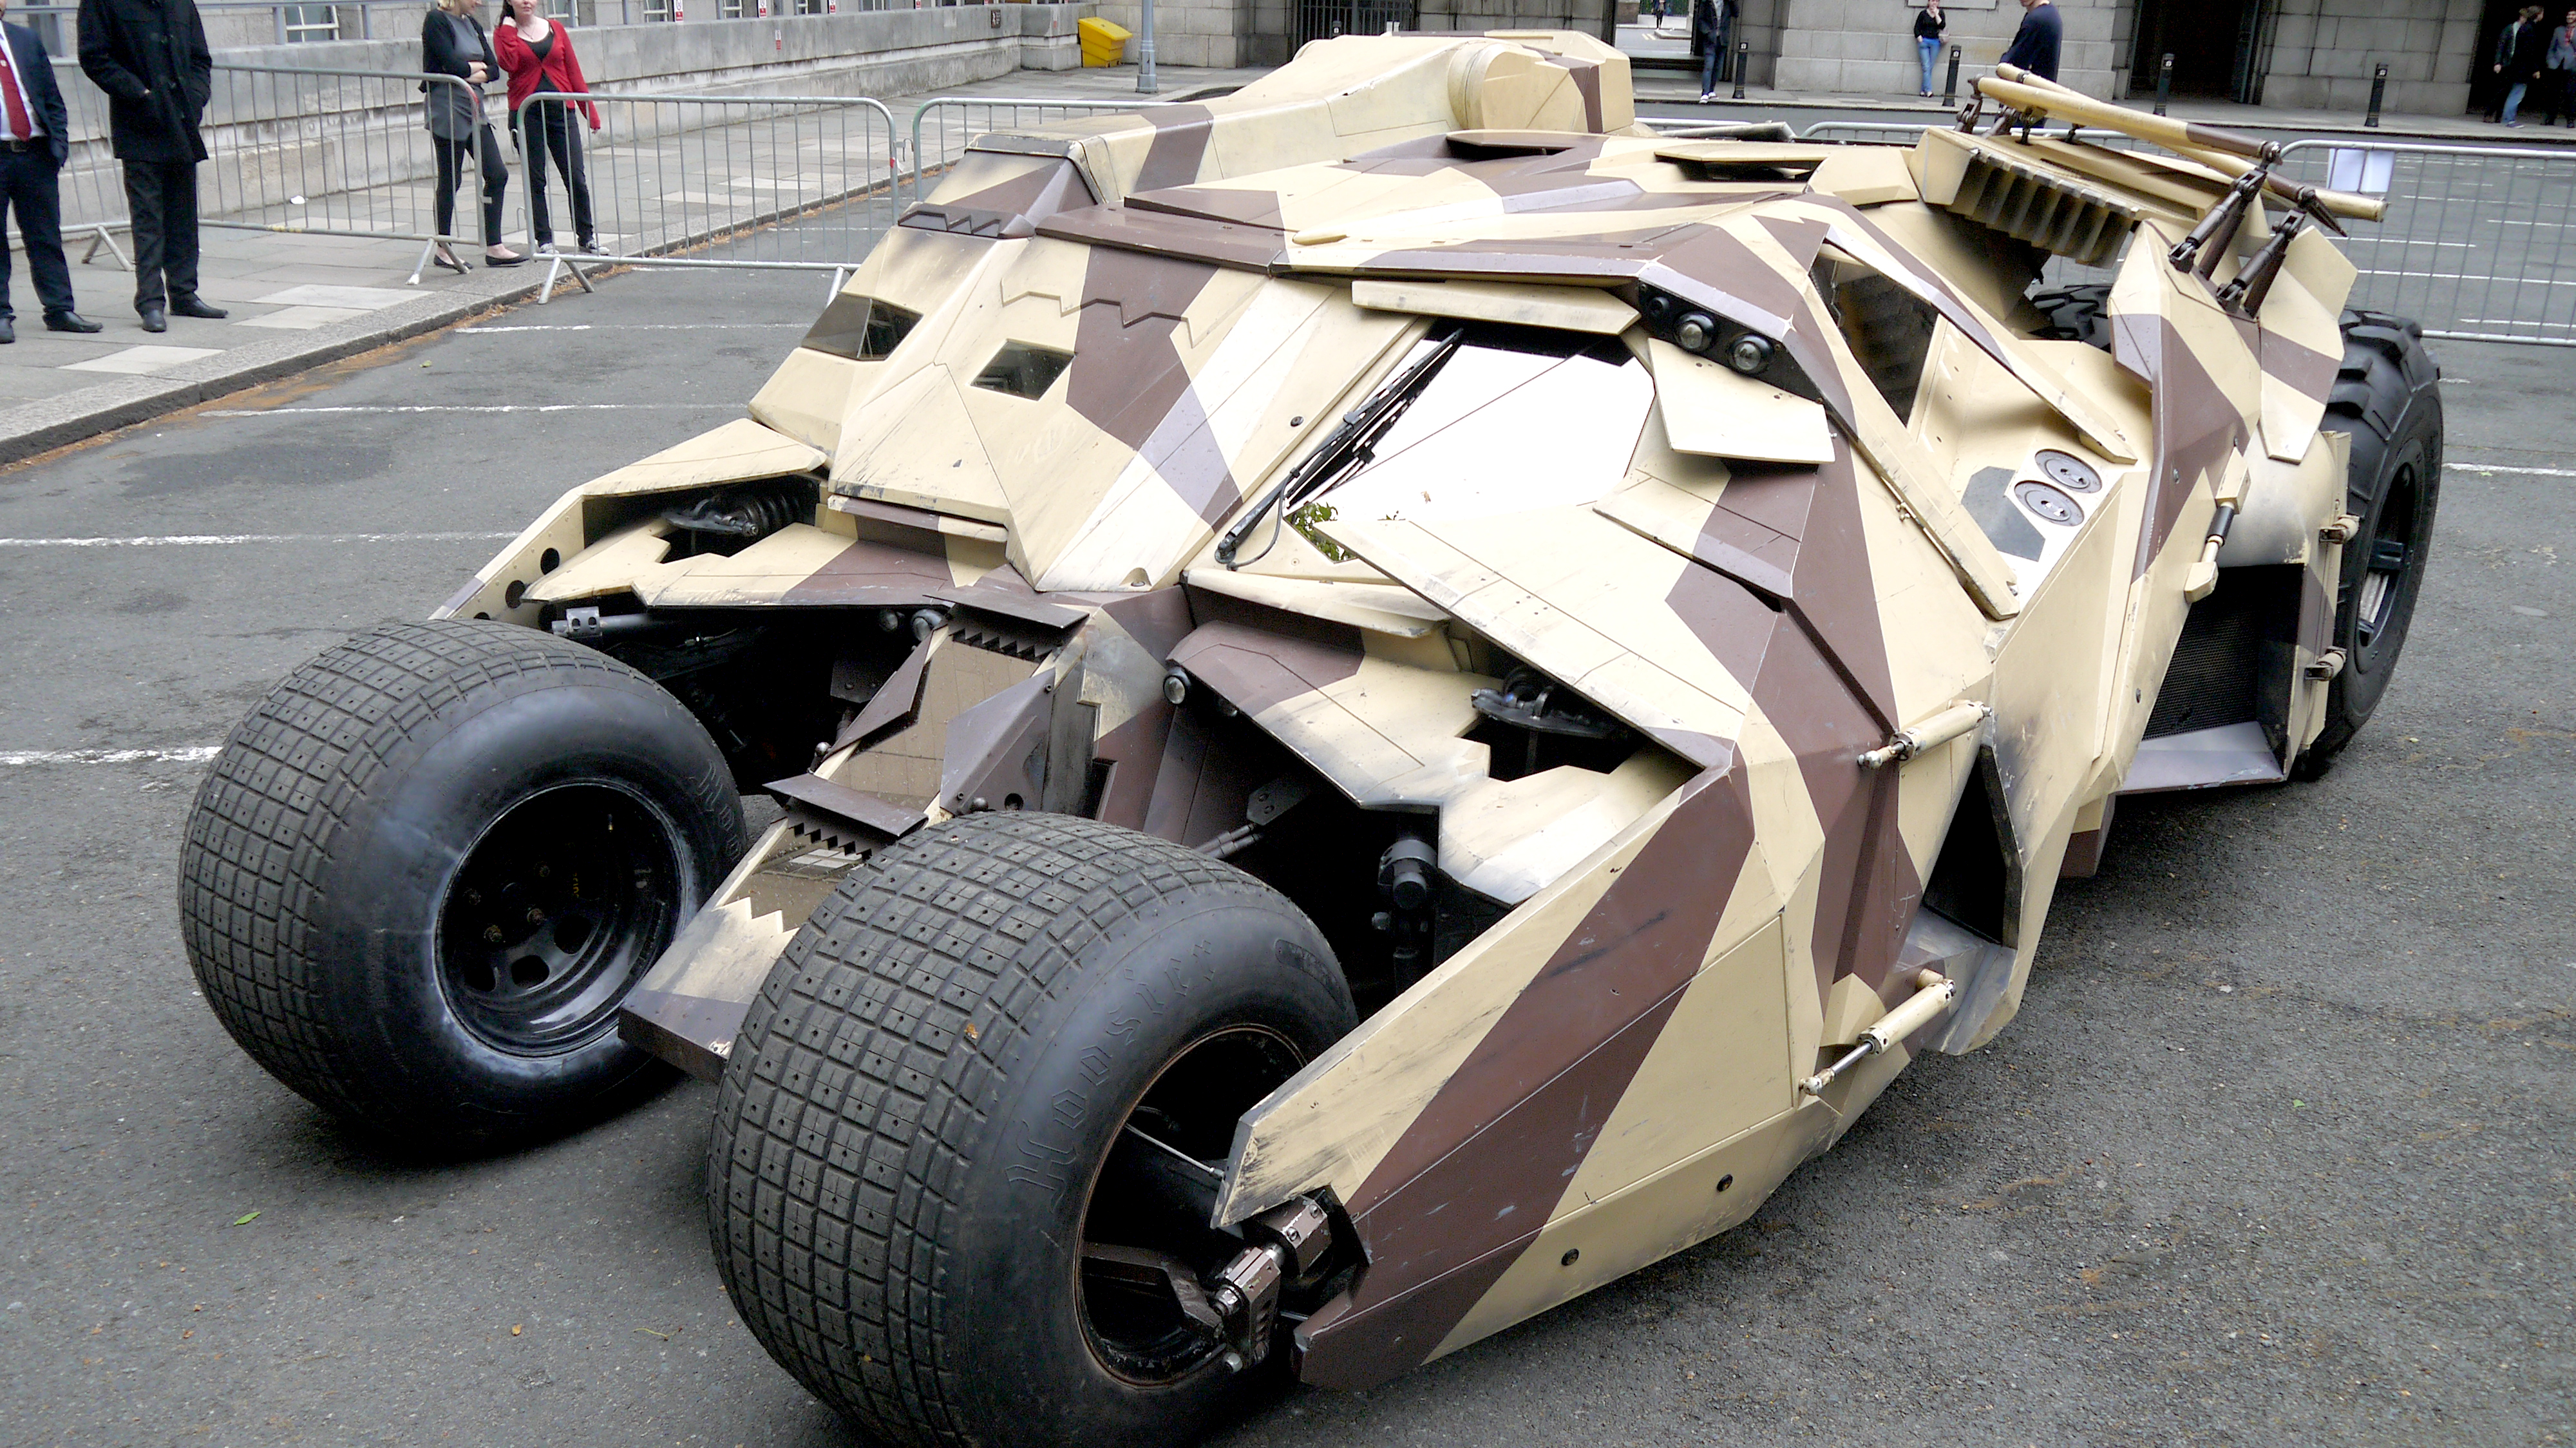 The technology of the Tumbler - how Britain made the Dark Knight